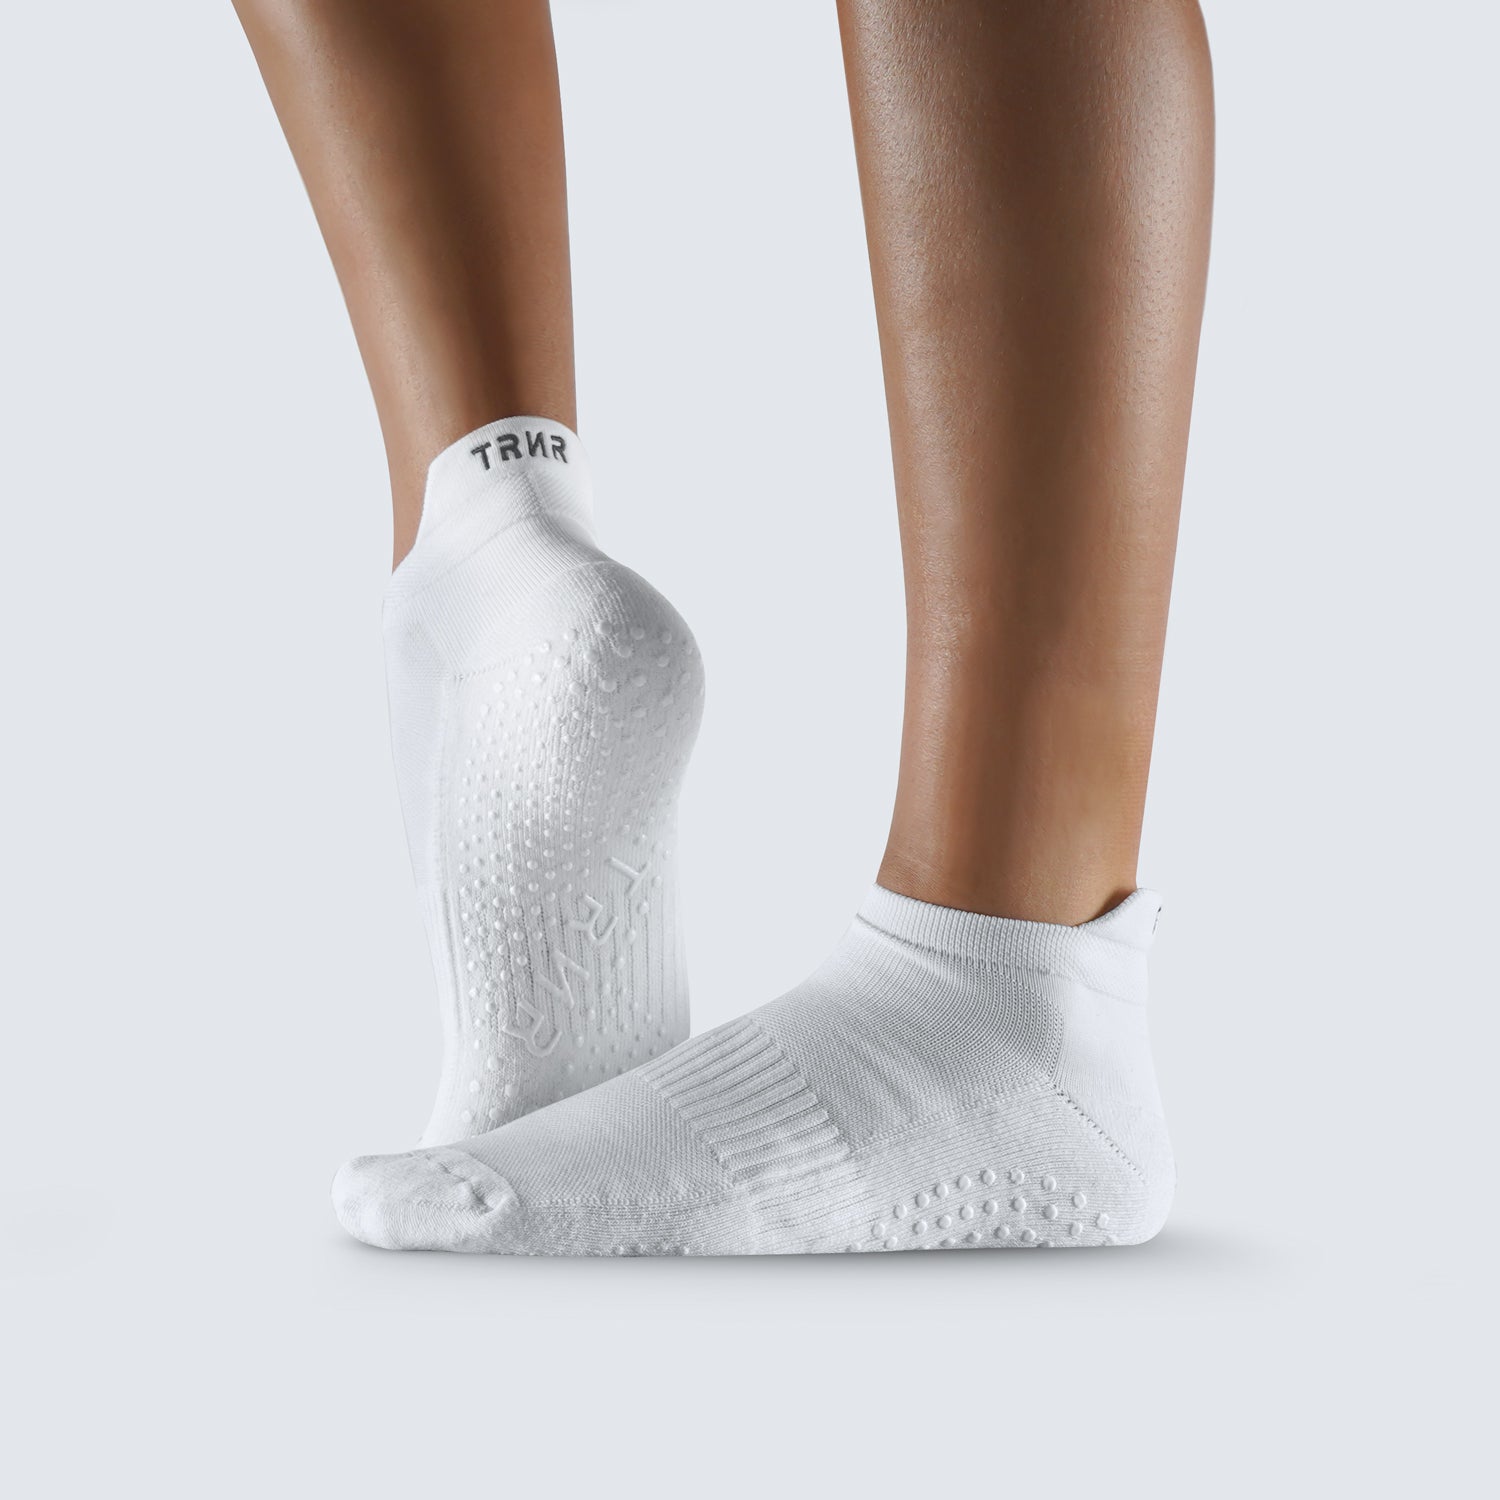 TRNR Ankle Grip Socks - White | Yoga, Barre and Pilates Socks with Bottom Grippers